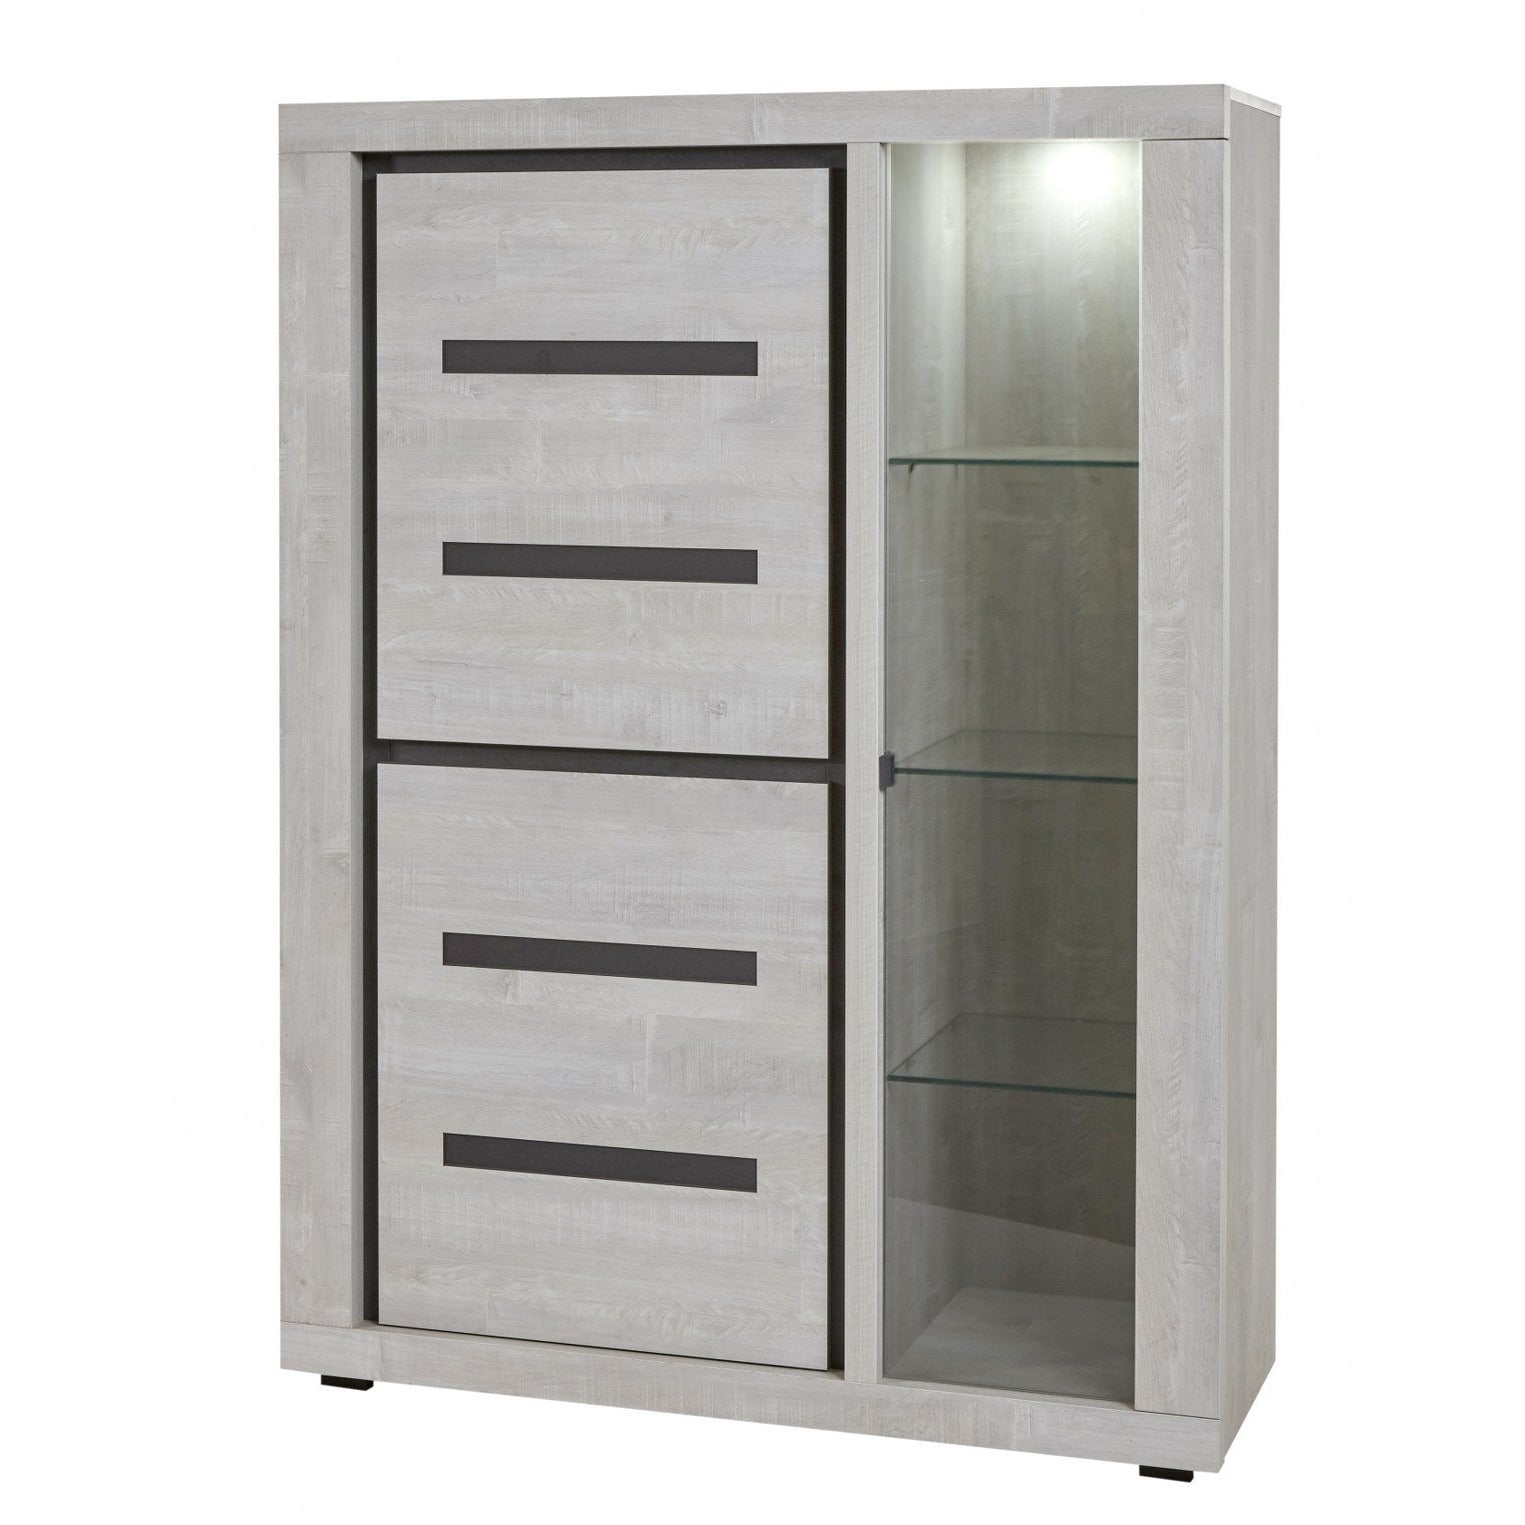 Wall cabinet | Furniture series Vento | light gray, natural | 132x